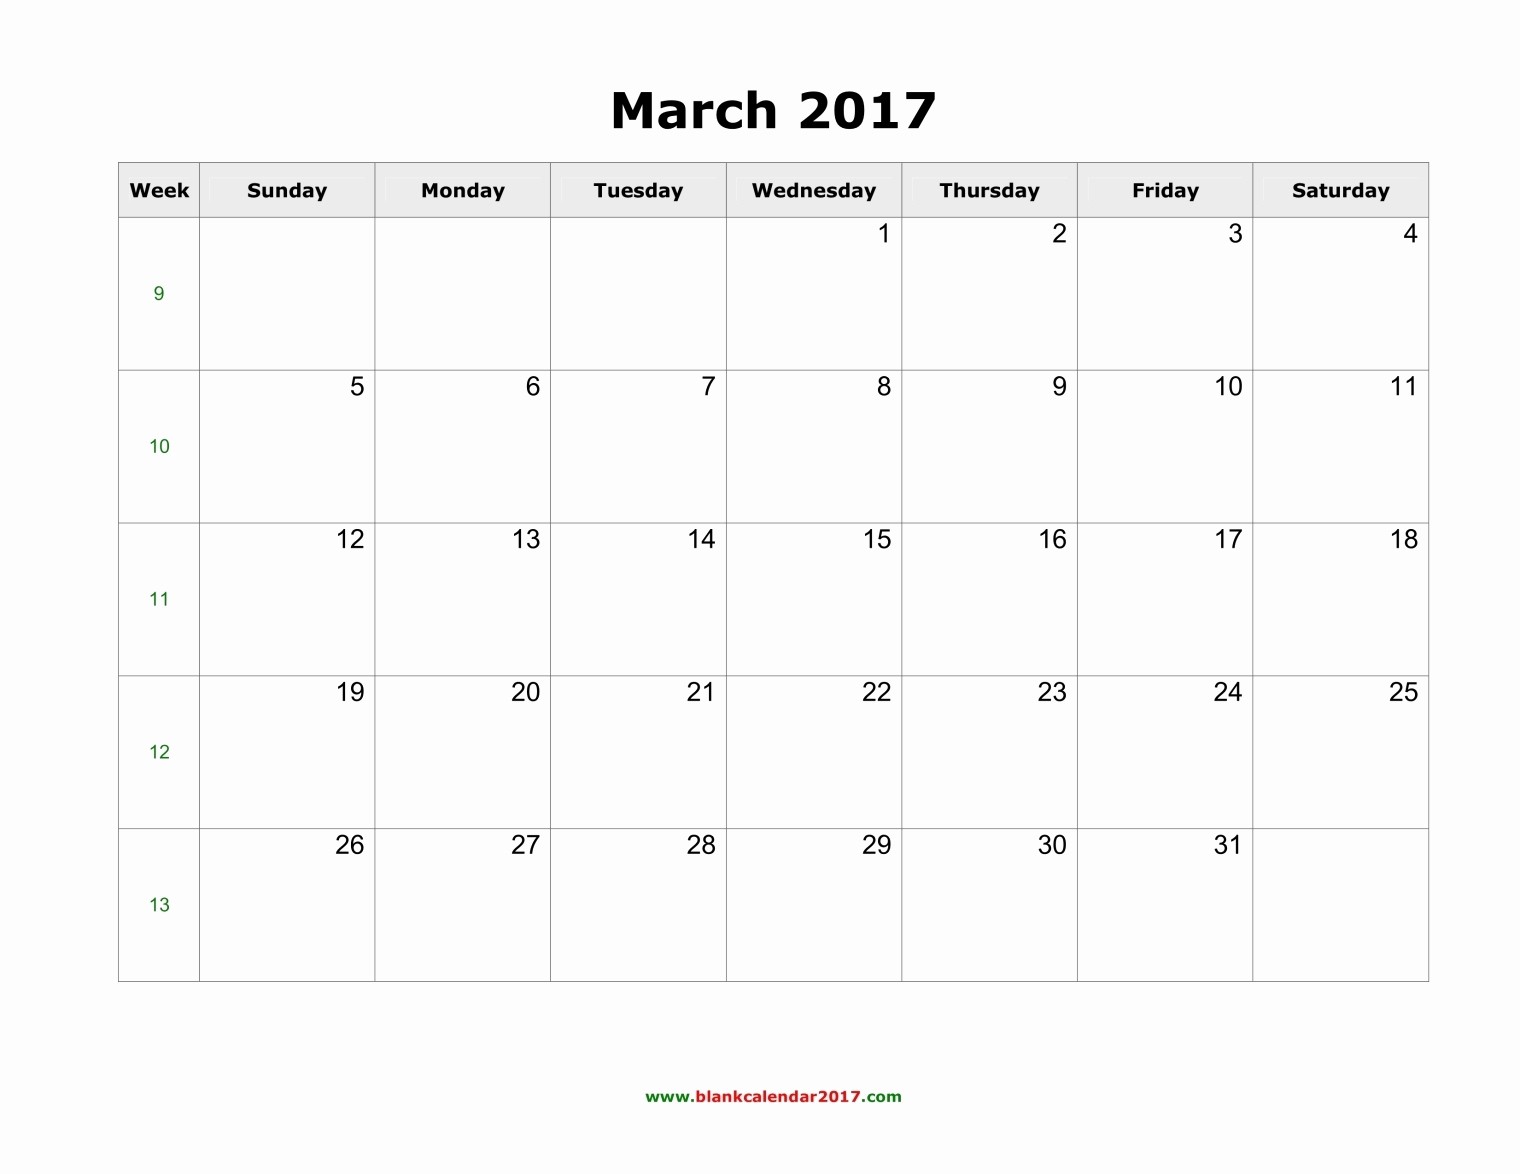 2017 Weekly Calendar with Holidays Beautiful Blank Calendar for March 2017